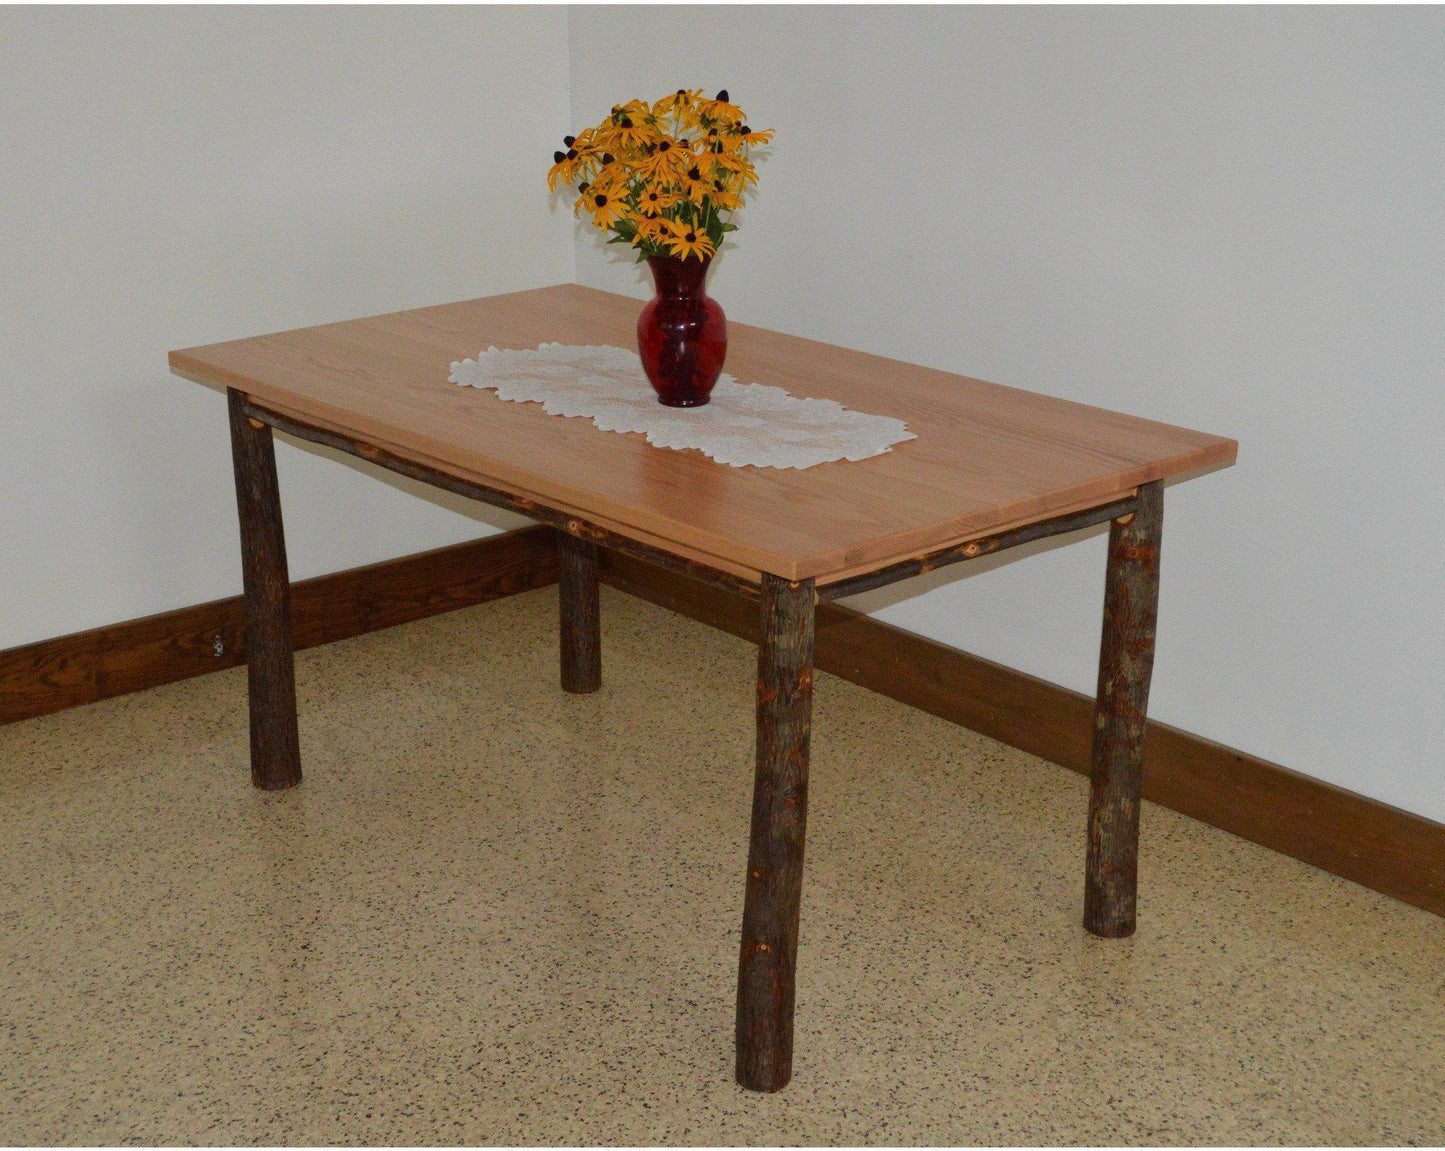 A & L Furniture Co. 5' Hickory Farm Table  - Ships FREE in 5-7 Business days - Rocking Furniture